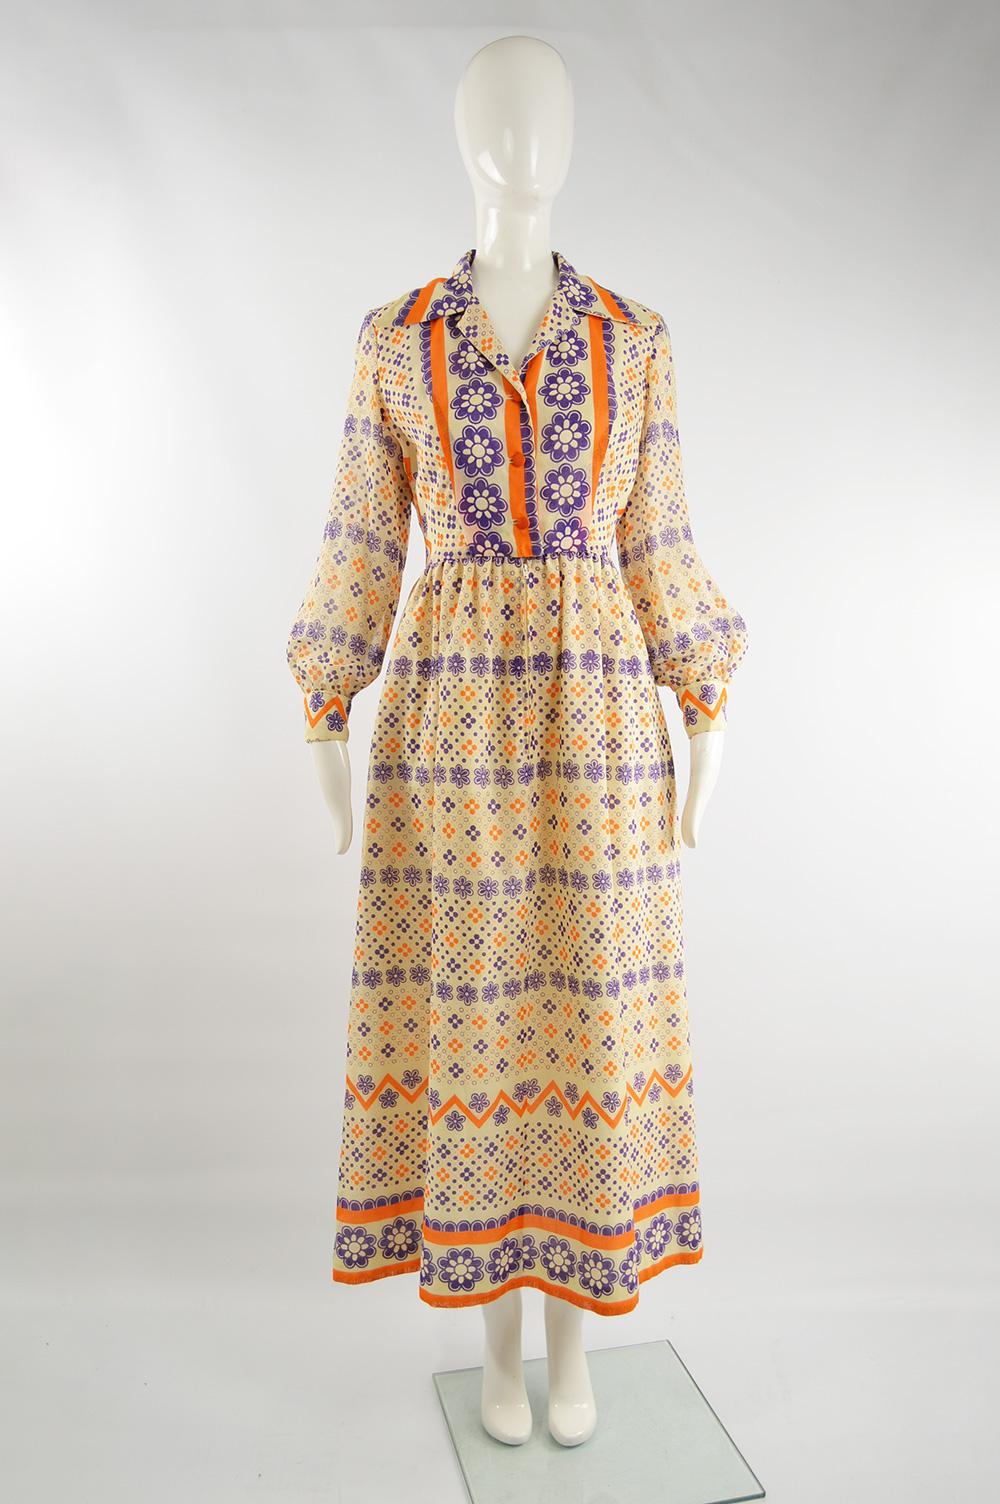 A fabulous vintage boho maxi dress from the late 60s / early 70s by luxury department store, Saks Fifth Avenue. In an off white cotton voile with a bold orange and purple floral pattern throughout.

Size: fits roughly like a modern women's UK 10-12/